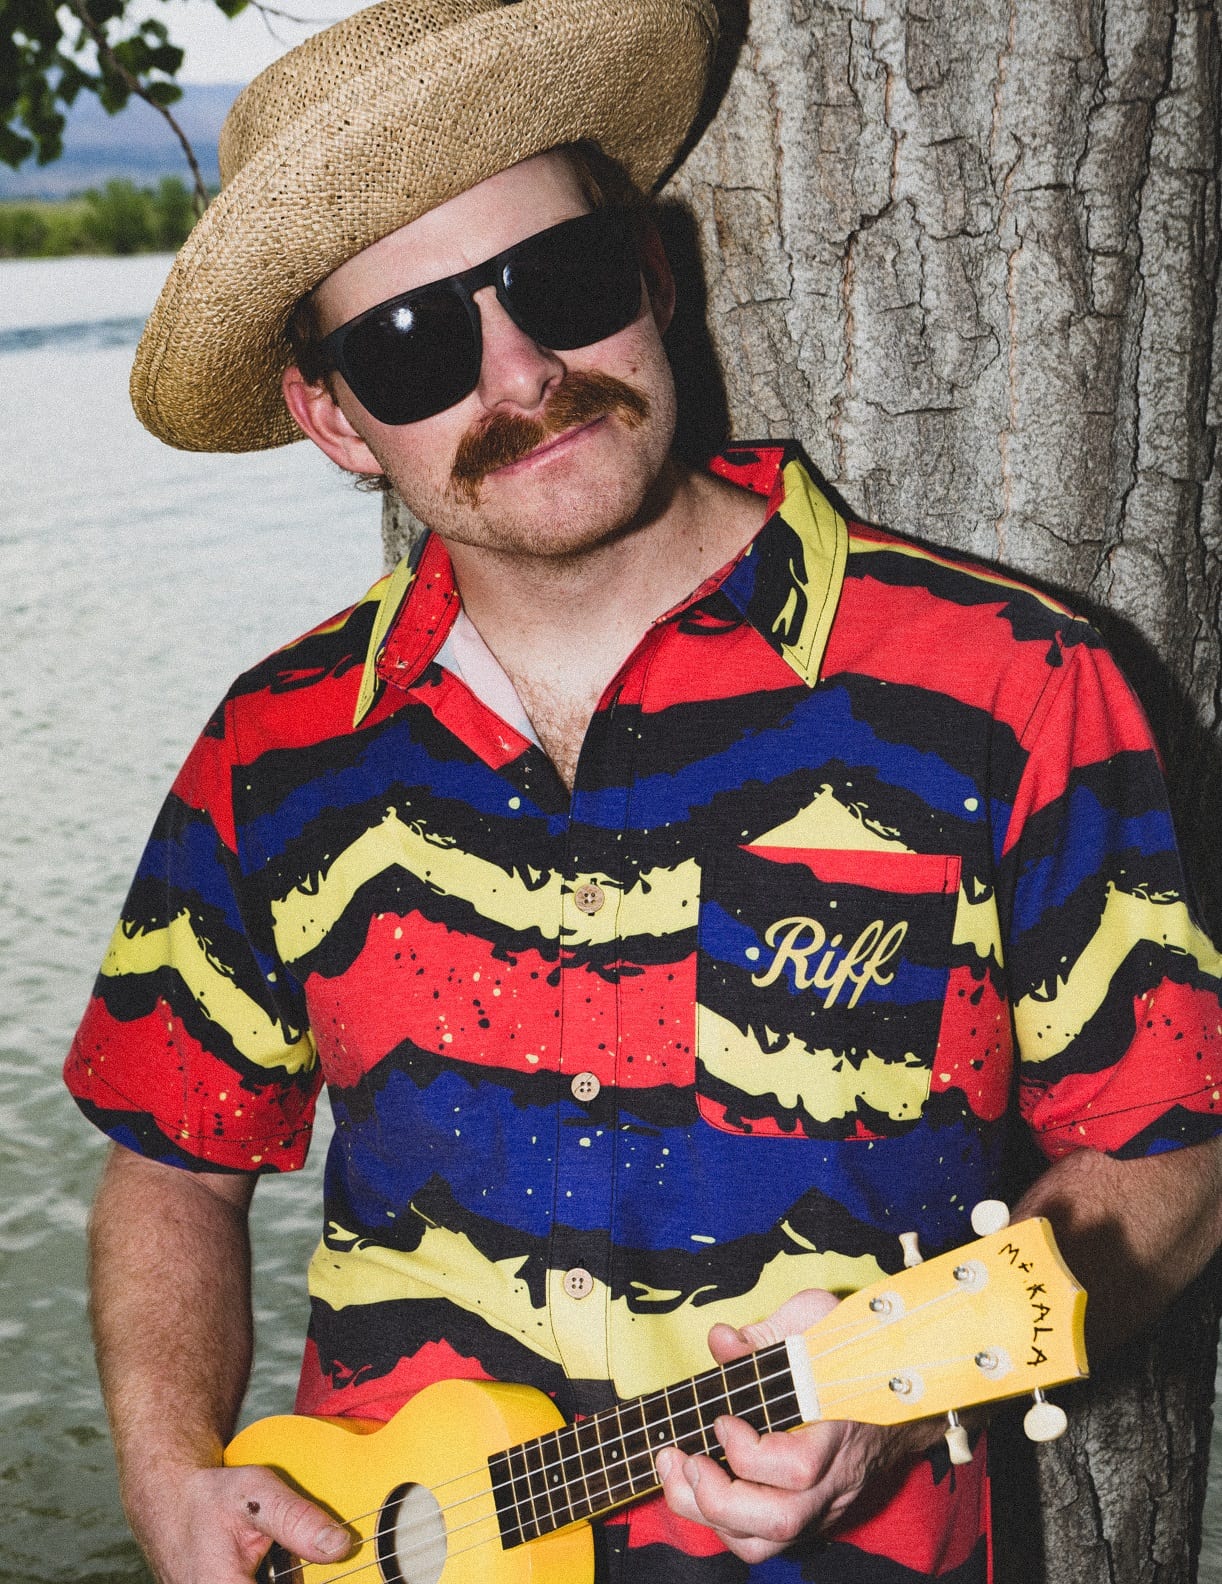 A man wearing sunglasses and a hat holding a guitar